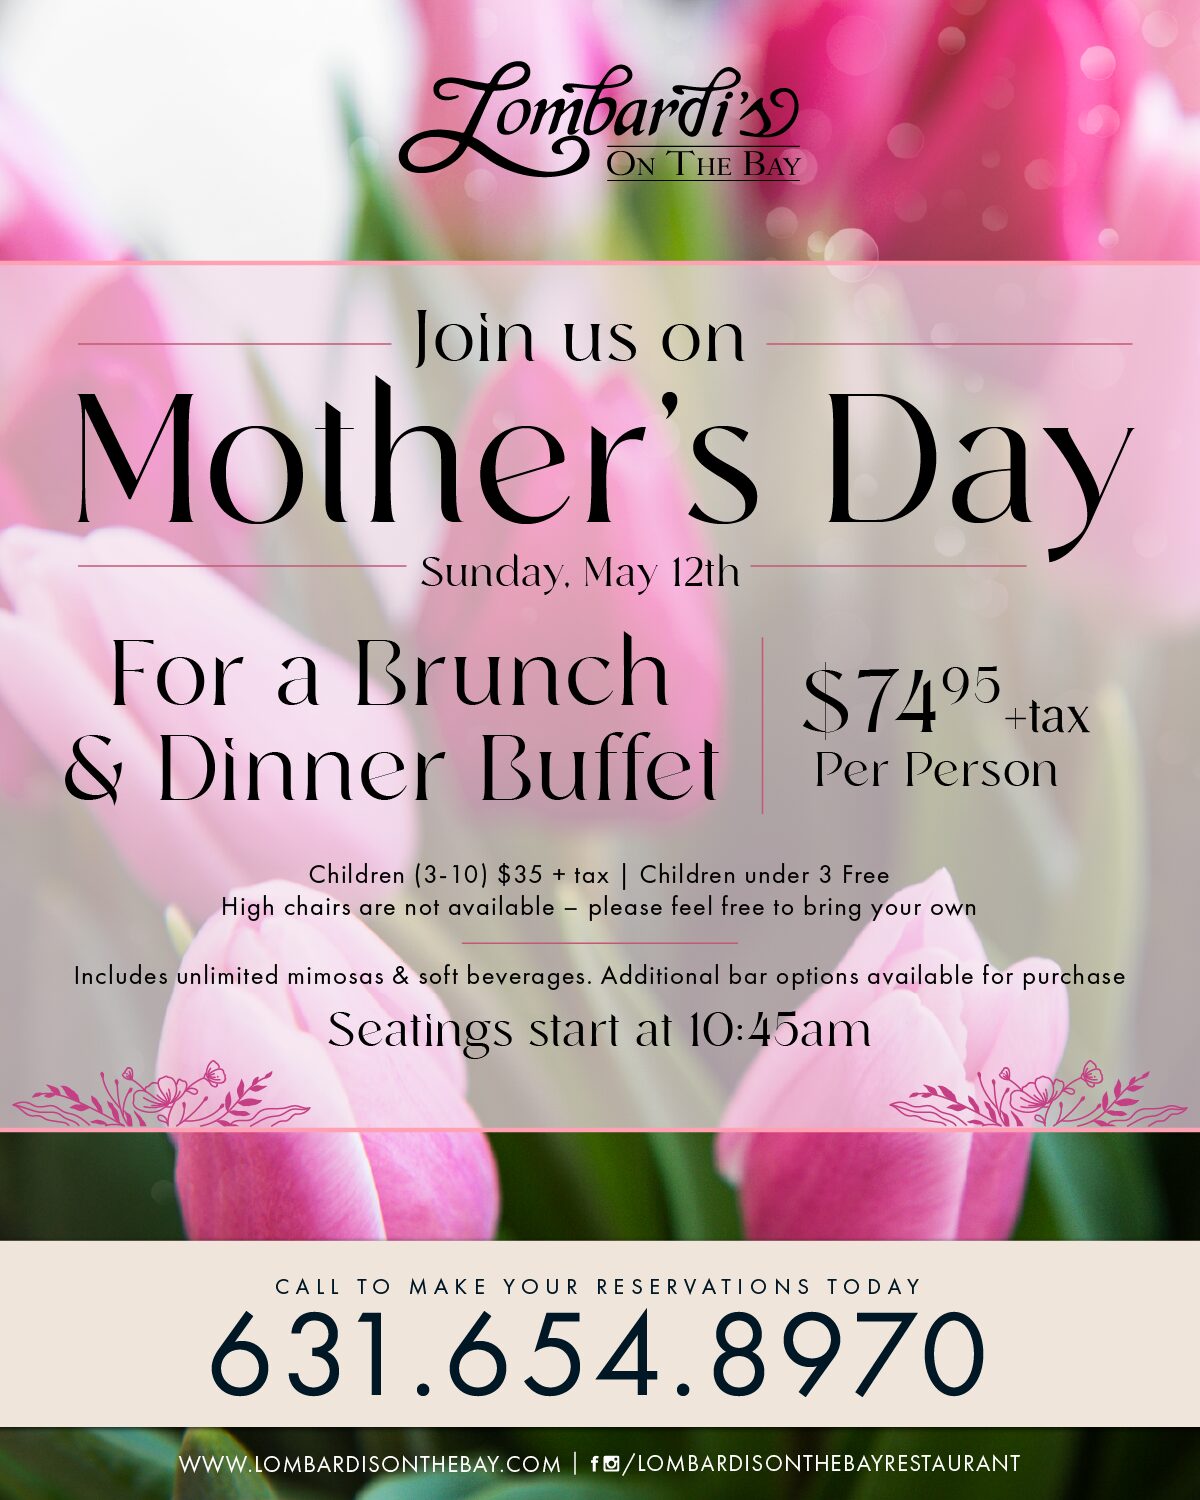 Lombardi’s on the Bay is serving up a special Mother’s Day brunch and dinner buffet on May 12, starting at 10:45 am. The buffet includes unlimited mimosas and soft drinks, with more drink options available for purchase. Reservations are required.